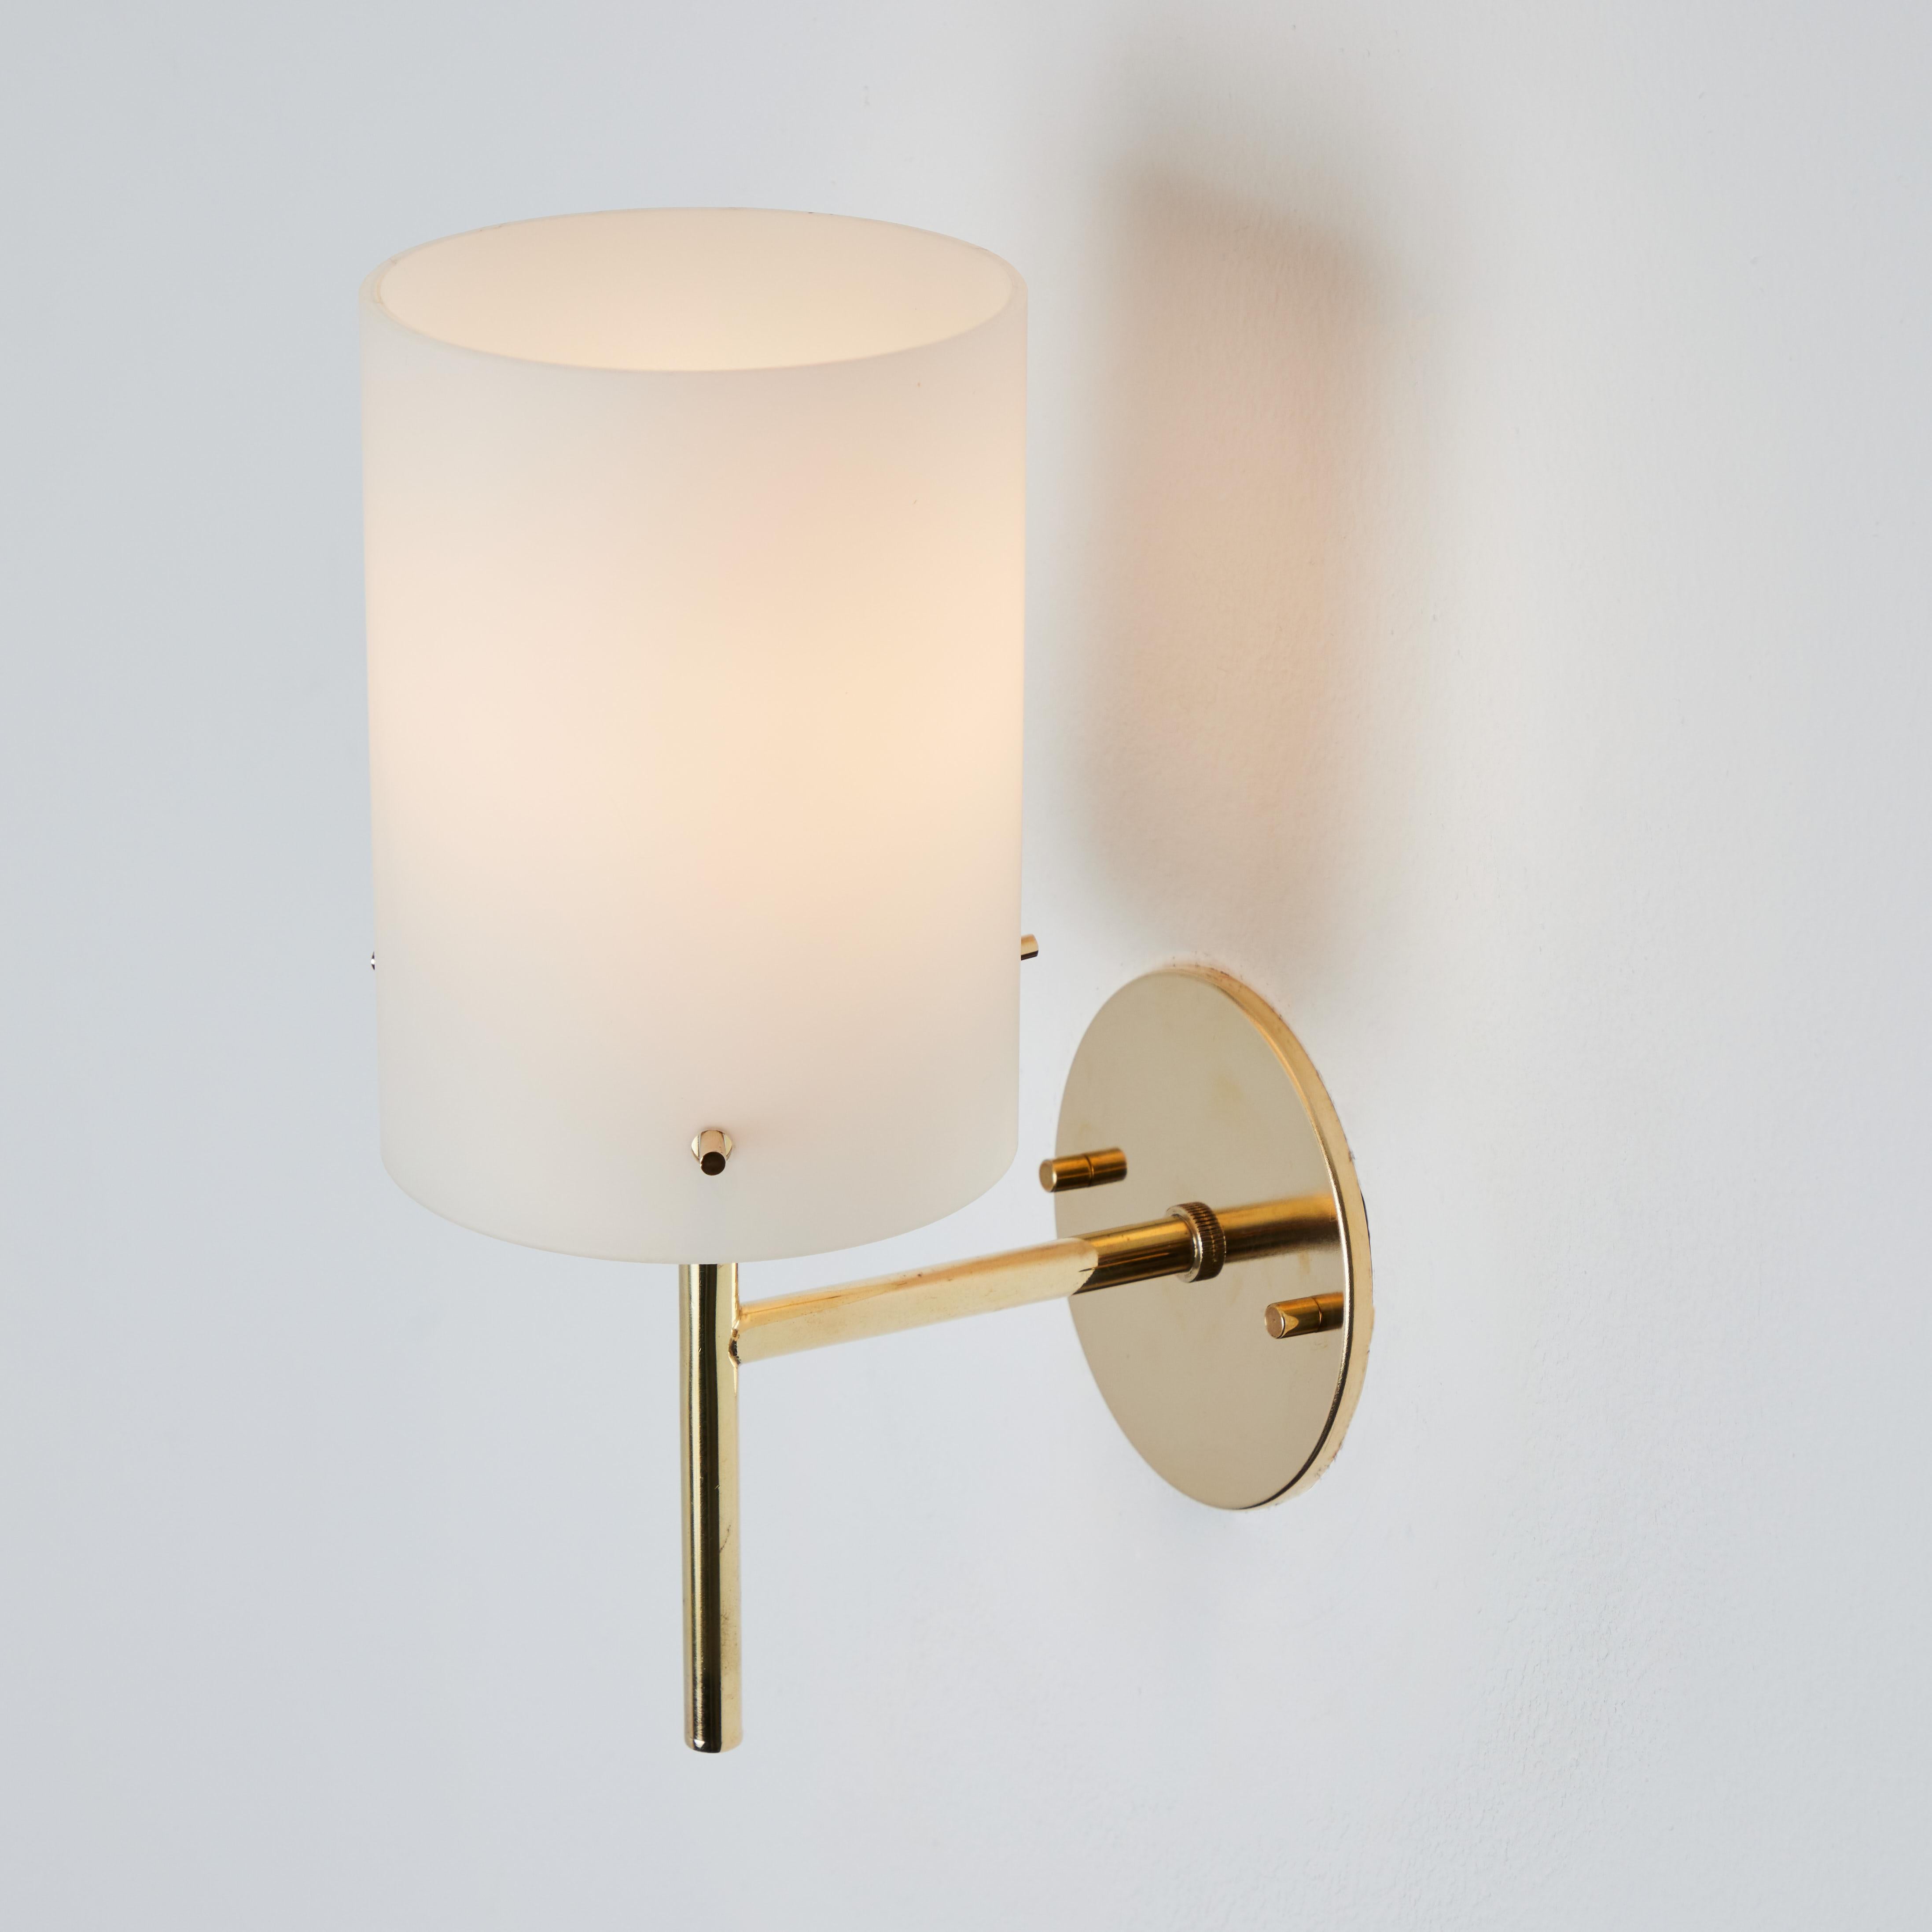 Mid-20th Century 1950s Tito Agnoli Brass & Glass Cylindrical Wall Lamp for O-Luce For Sale